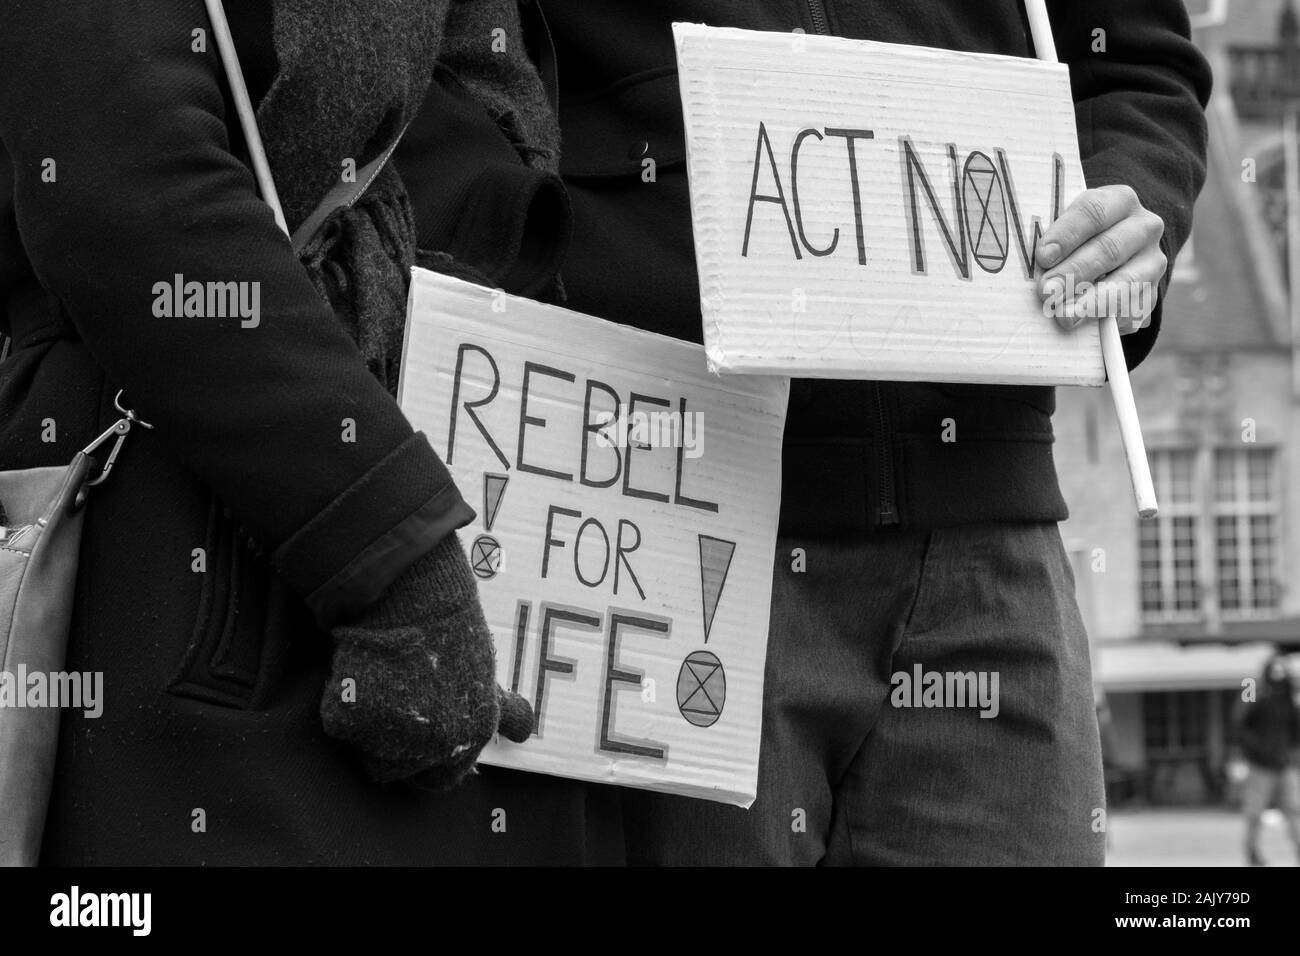 Sign Rebel For Life At At The Rebellion Extinction Demonstration On The Dam At 6-1-2020 Amsterdam The Netherlands 2020 In Black And White Stock Photo